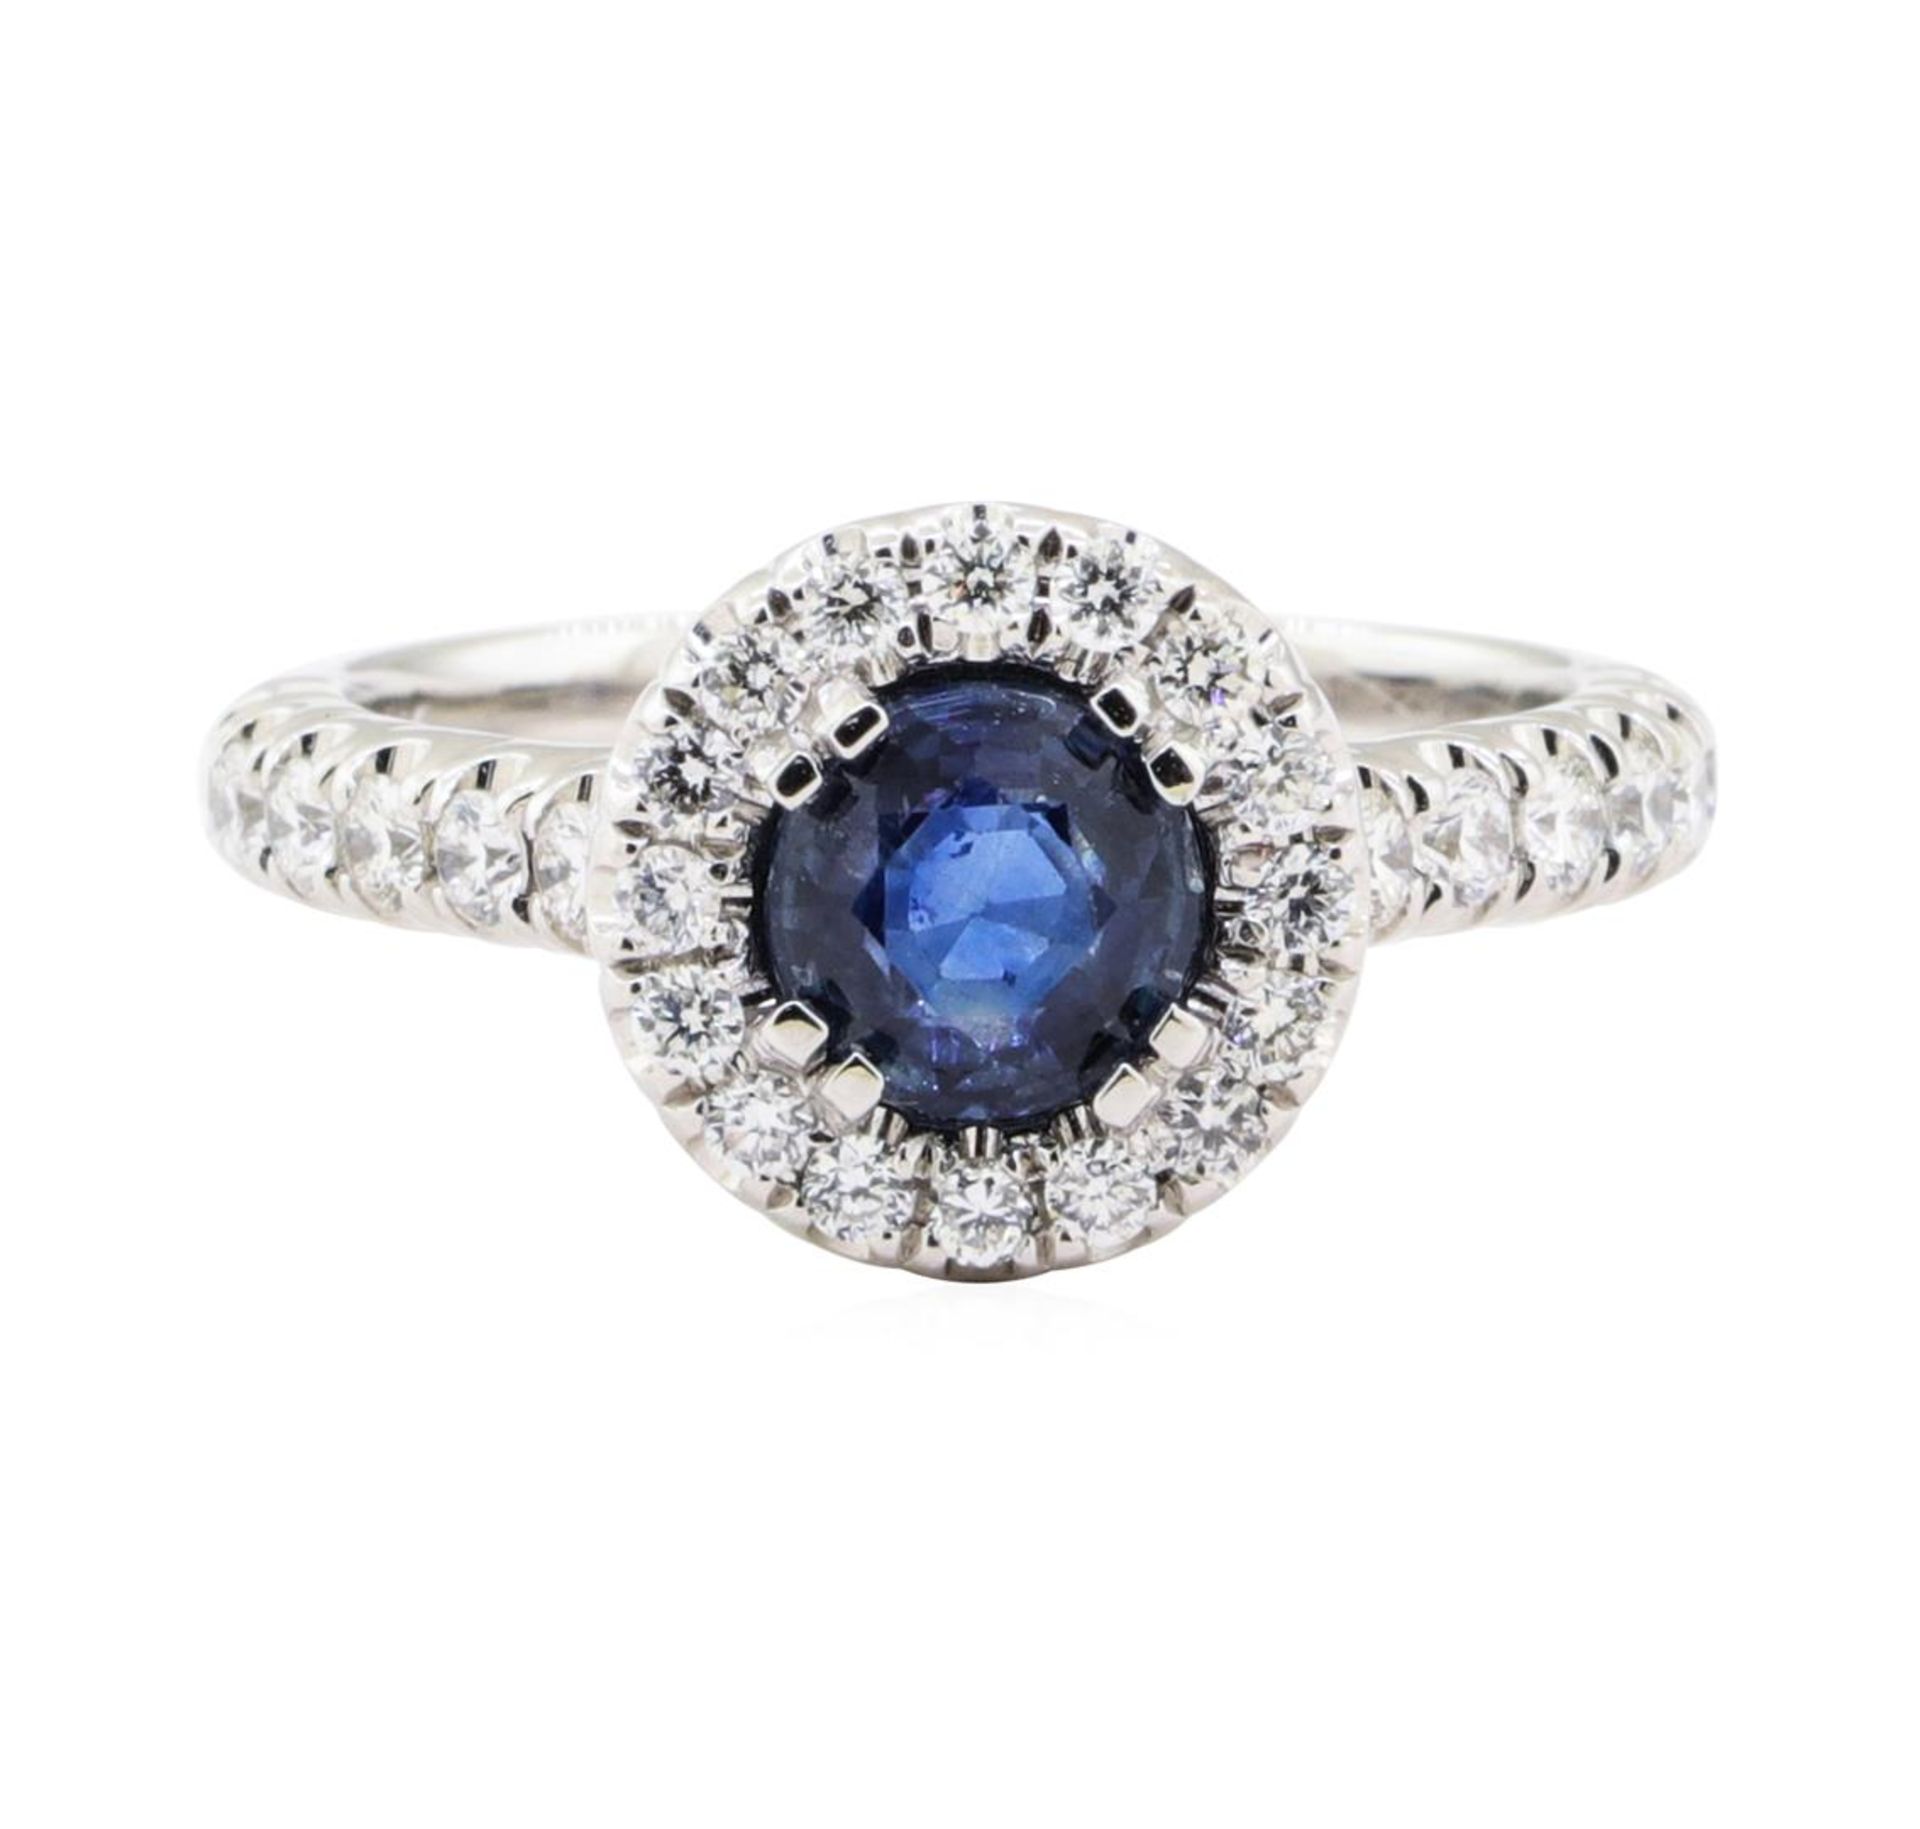 1.42 ctw Sapphire And Diamond Ring - 14KT White Gold - Image 3 of 10